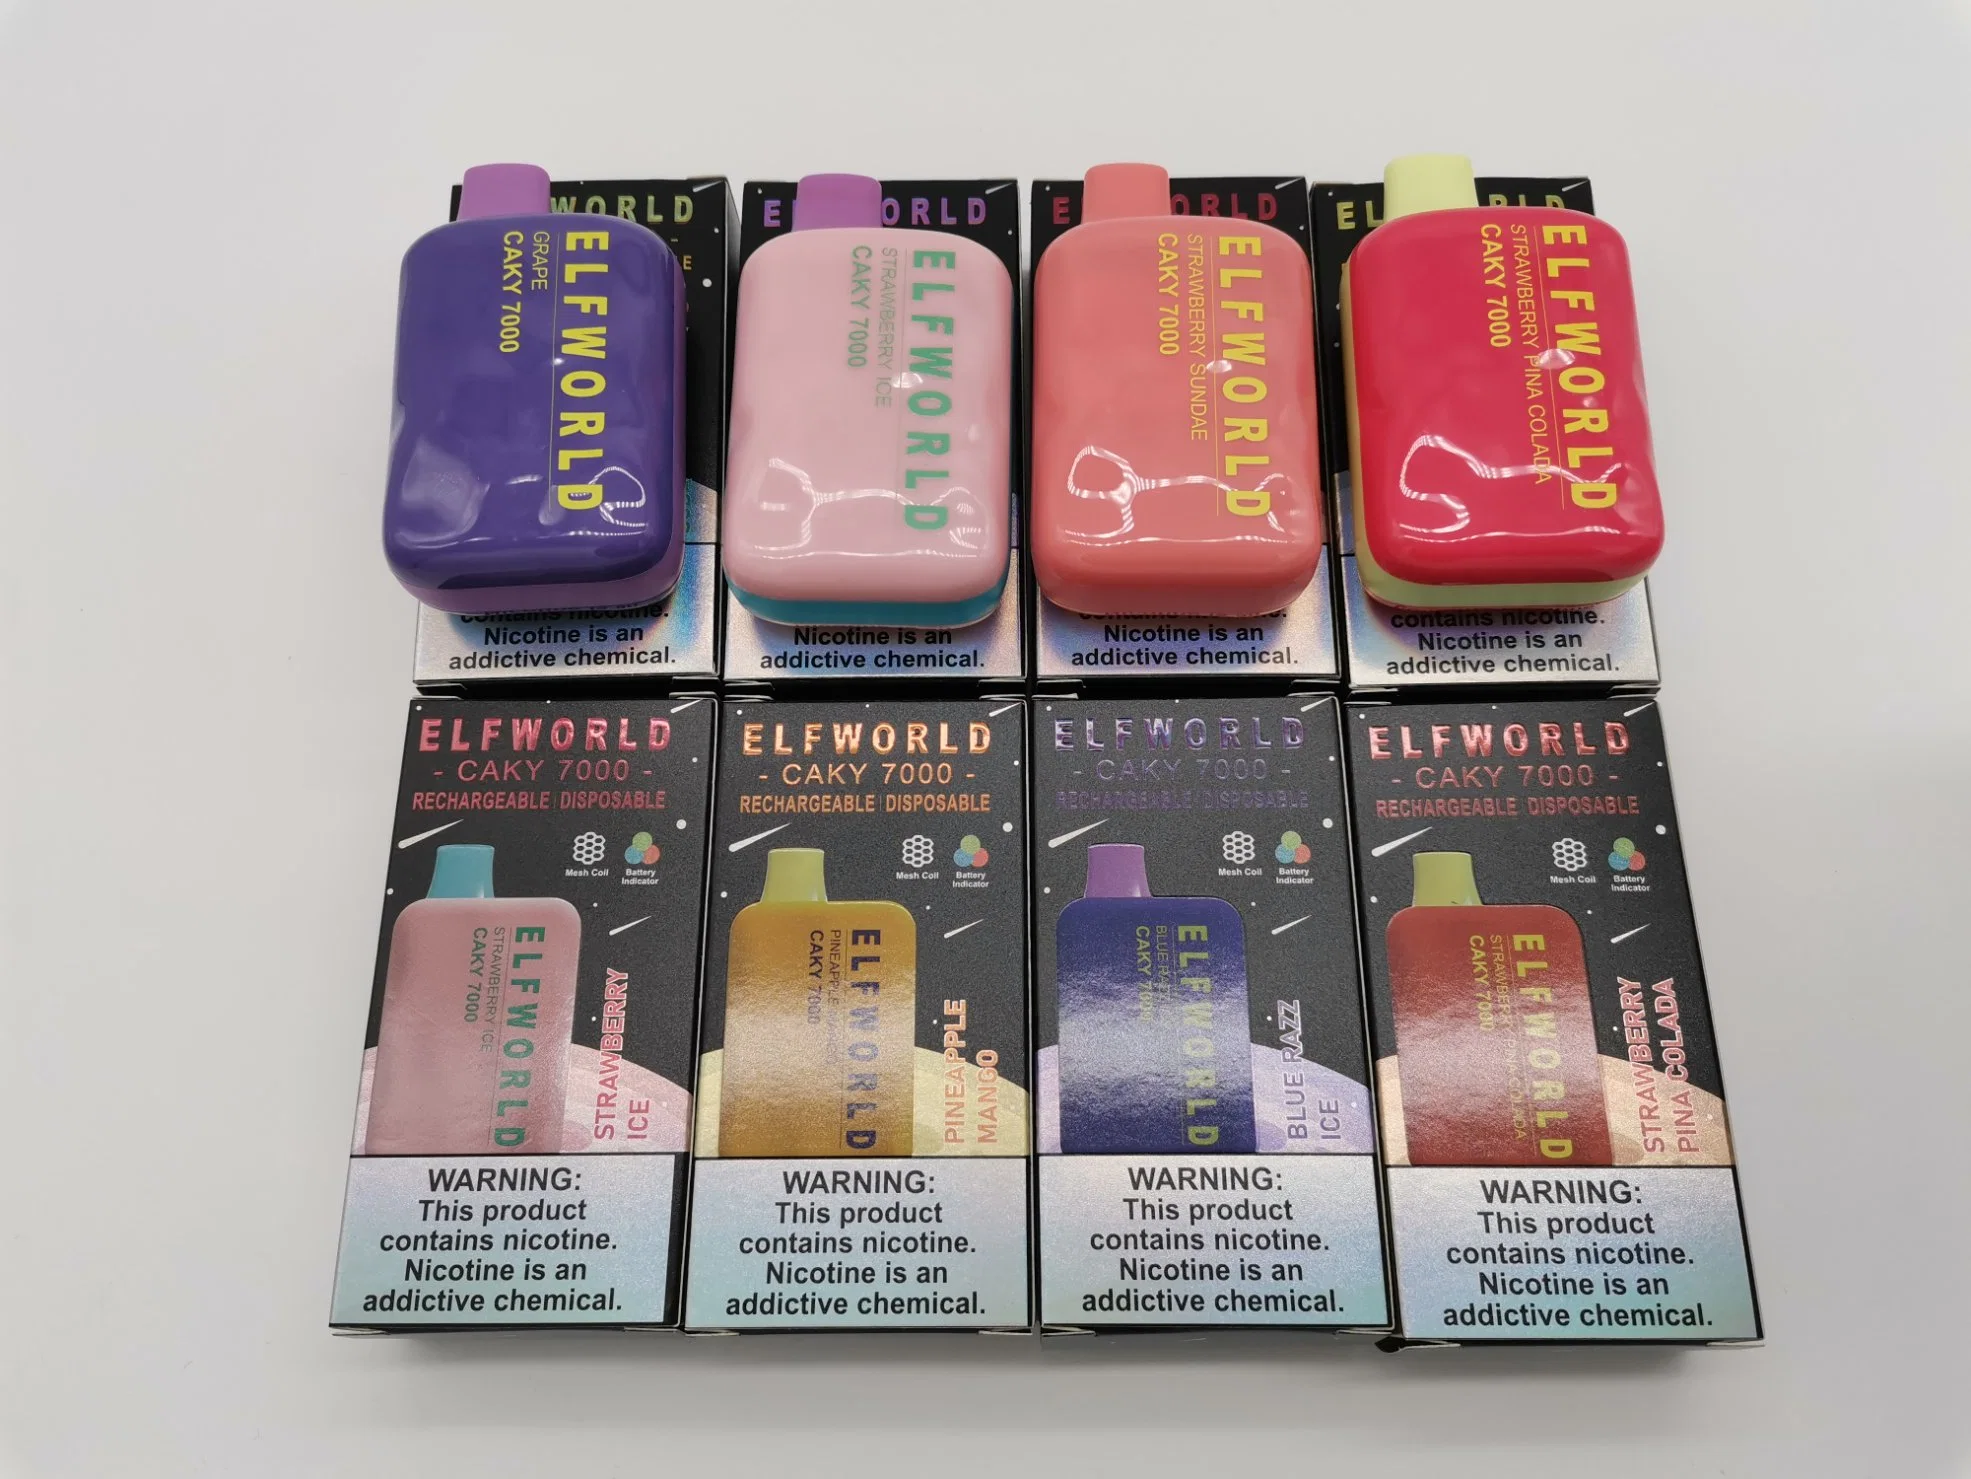 Elf World Caky 7000 Disposable/Chargeable Vape Pod Vibez Pod Hyppe Max Flow Mesh Disposable/Chargeable 10000 Puffs Wholesale/Supplier - Hyppe Bar